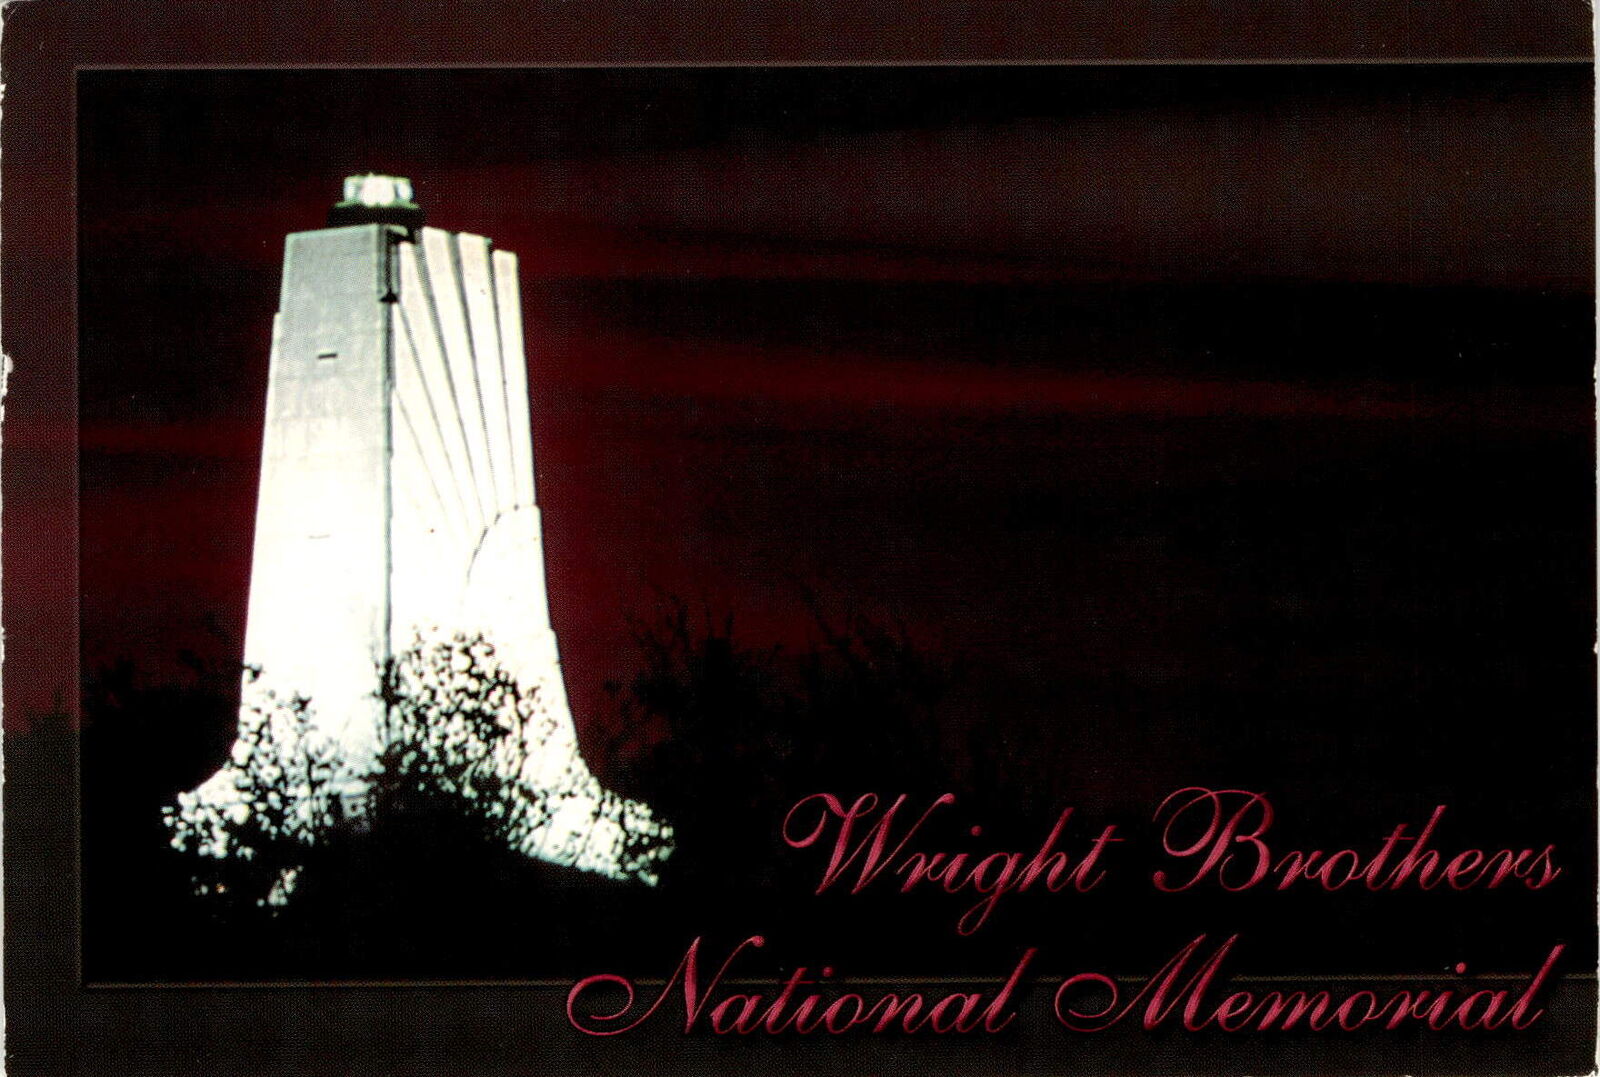 Wright Brothers National Memorial, 1932, Orville Wright, Wilbur Postcard